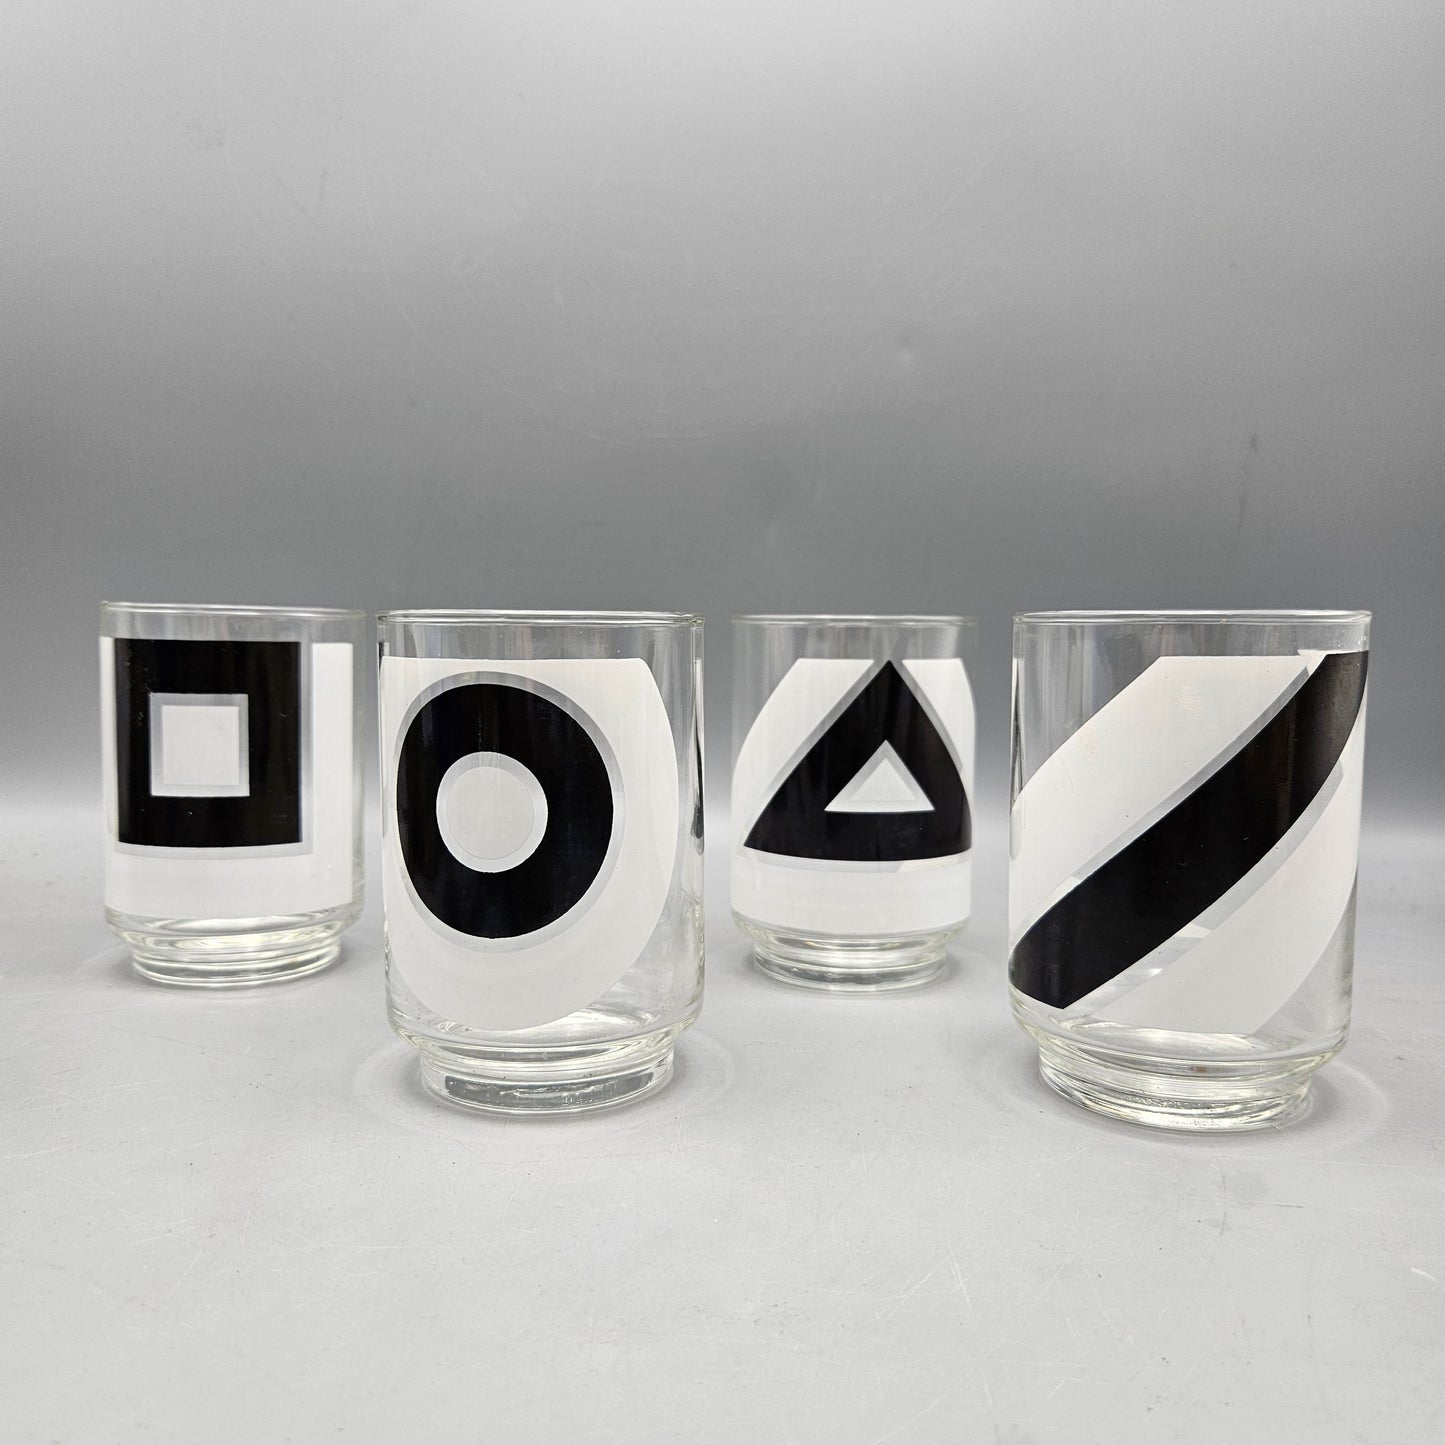 Set of 4 Vintage Libbey Glass, Black and White Geometric Shapes Cocktail Glasses